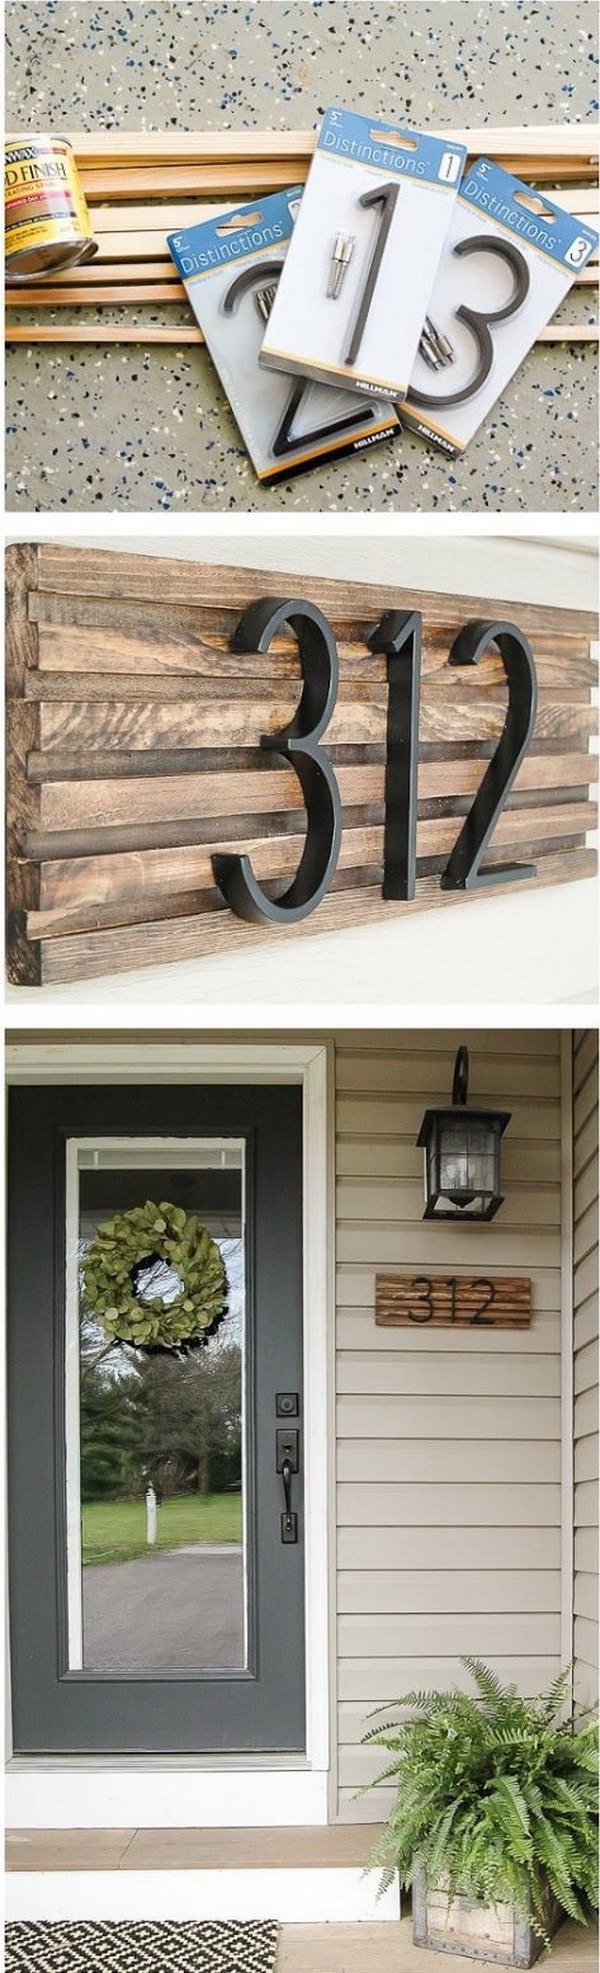 DIY Rustic House Number Sign. House numbers give your home a finished look while also helping visitors find their way to your home. You can create your own custom house number sign and add some rustic charm to your home's exterior! 